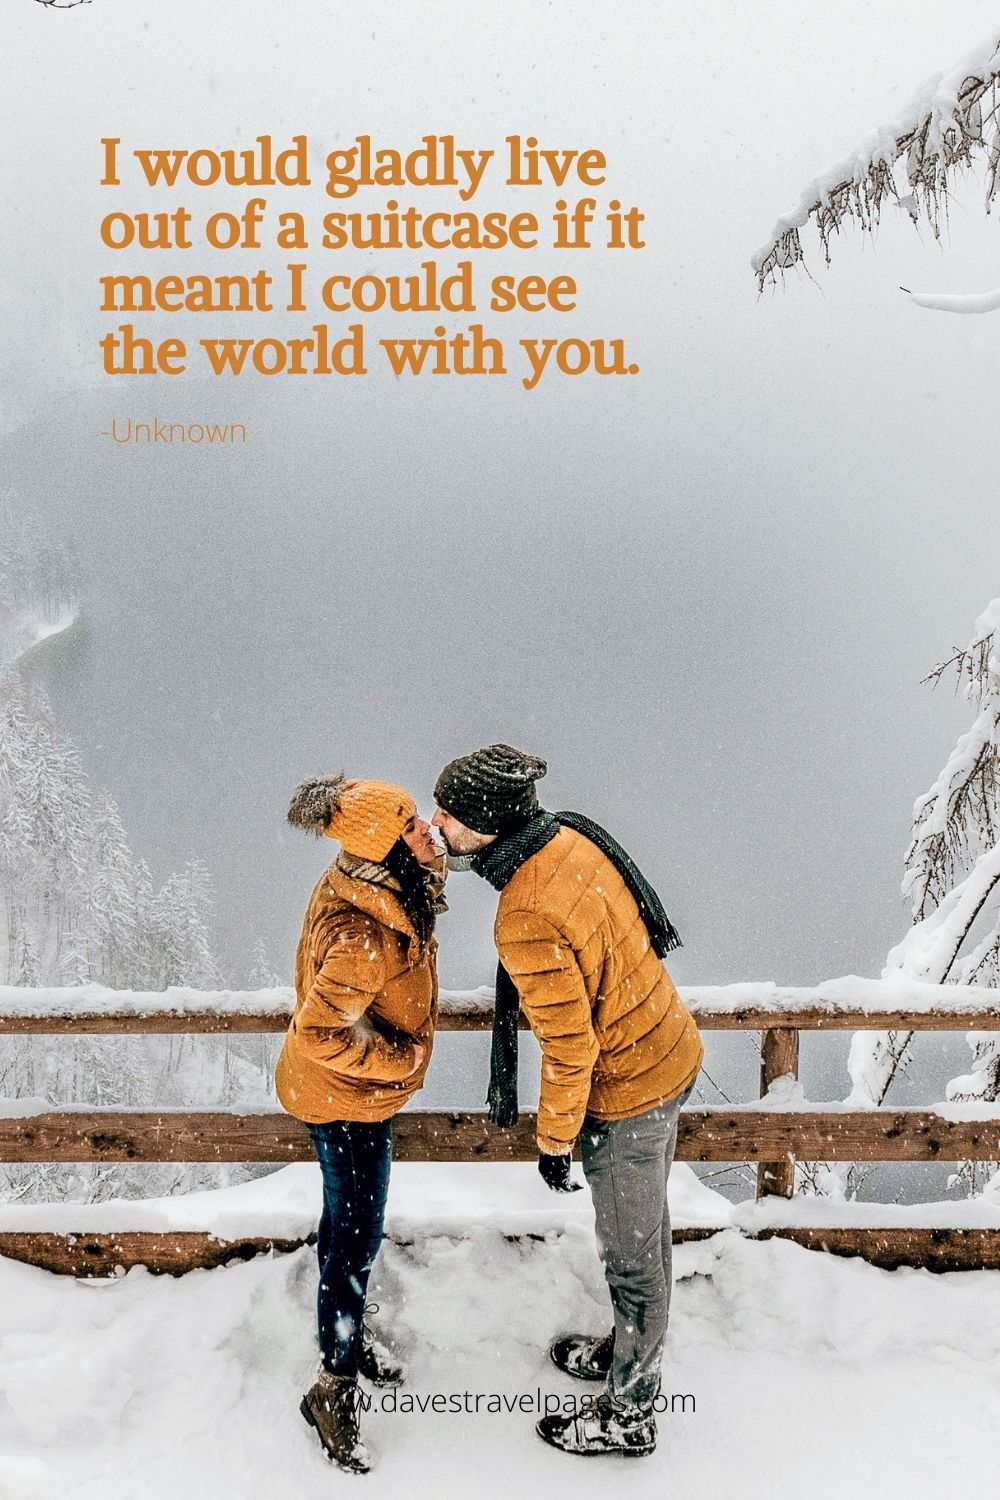 Couple Travel Quote: I would gladly live out of a suitcase if it meant I could see the world with you.